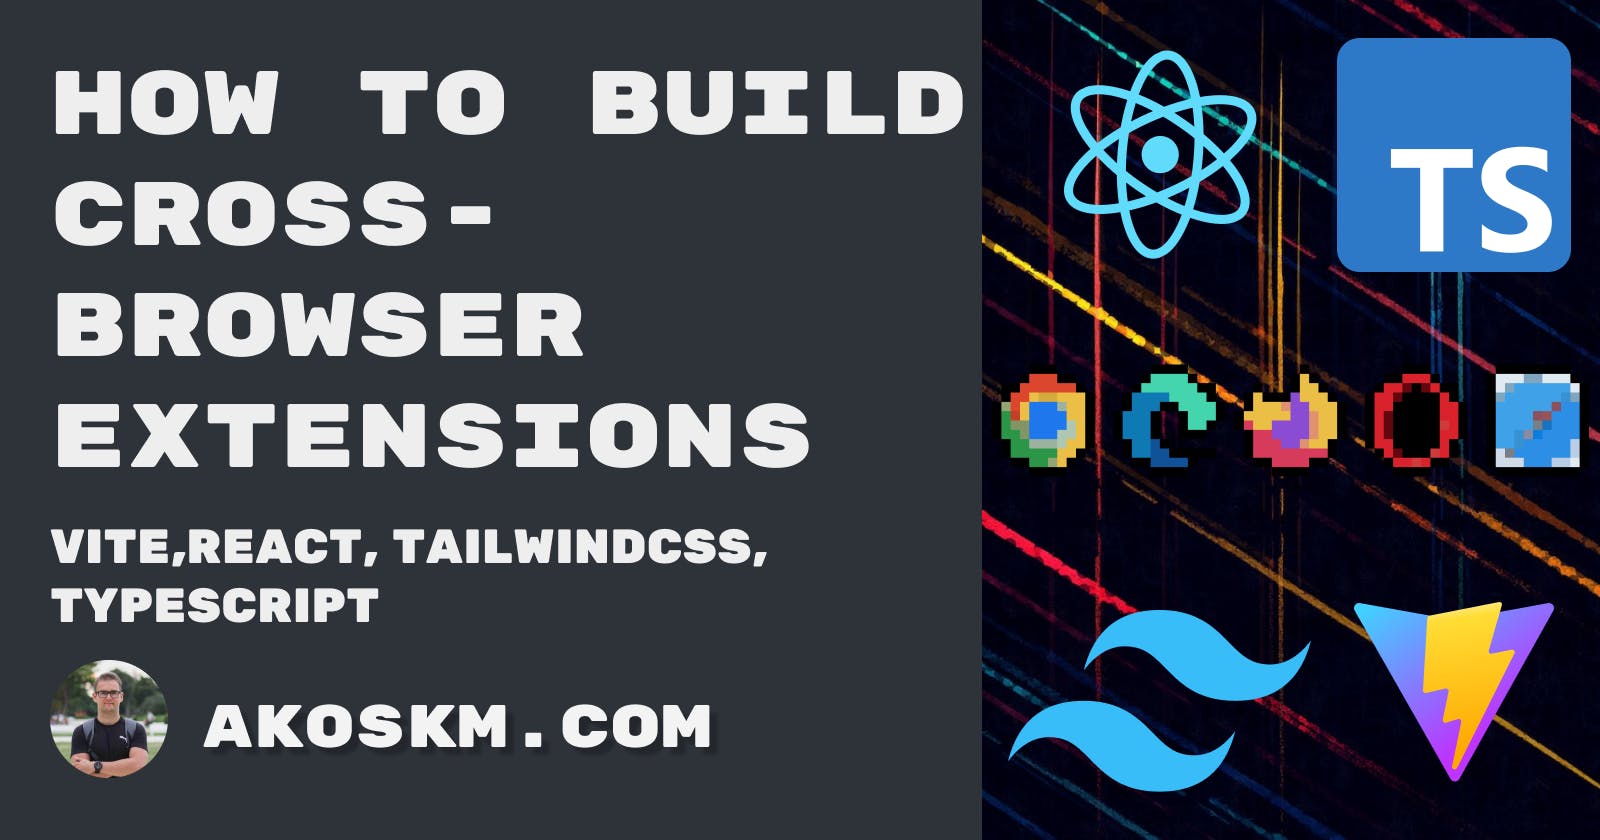 How to build Cross-Browser Extensions with Vite, React, and TailwindCSS